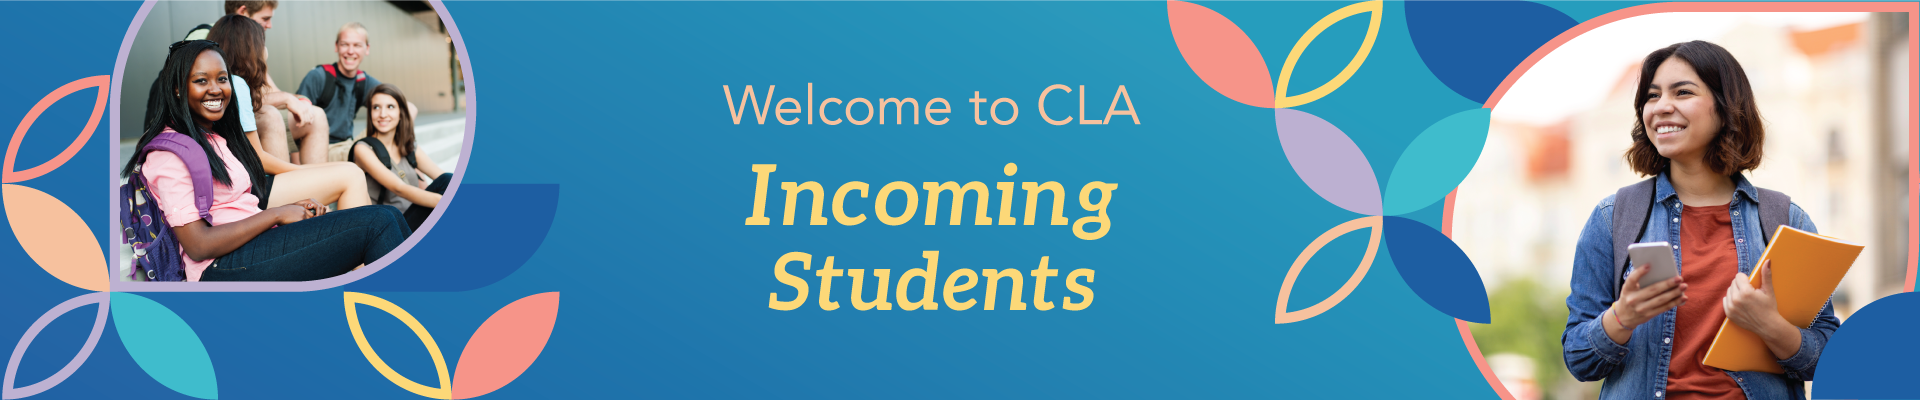 Welcome to CLA Incoming Students